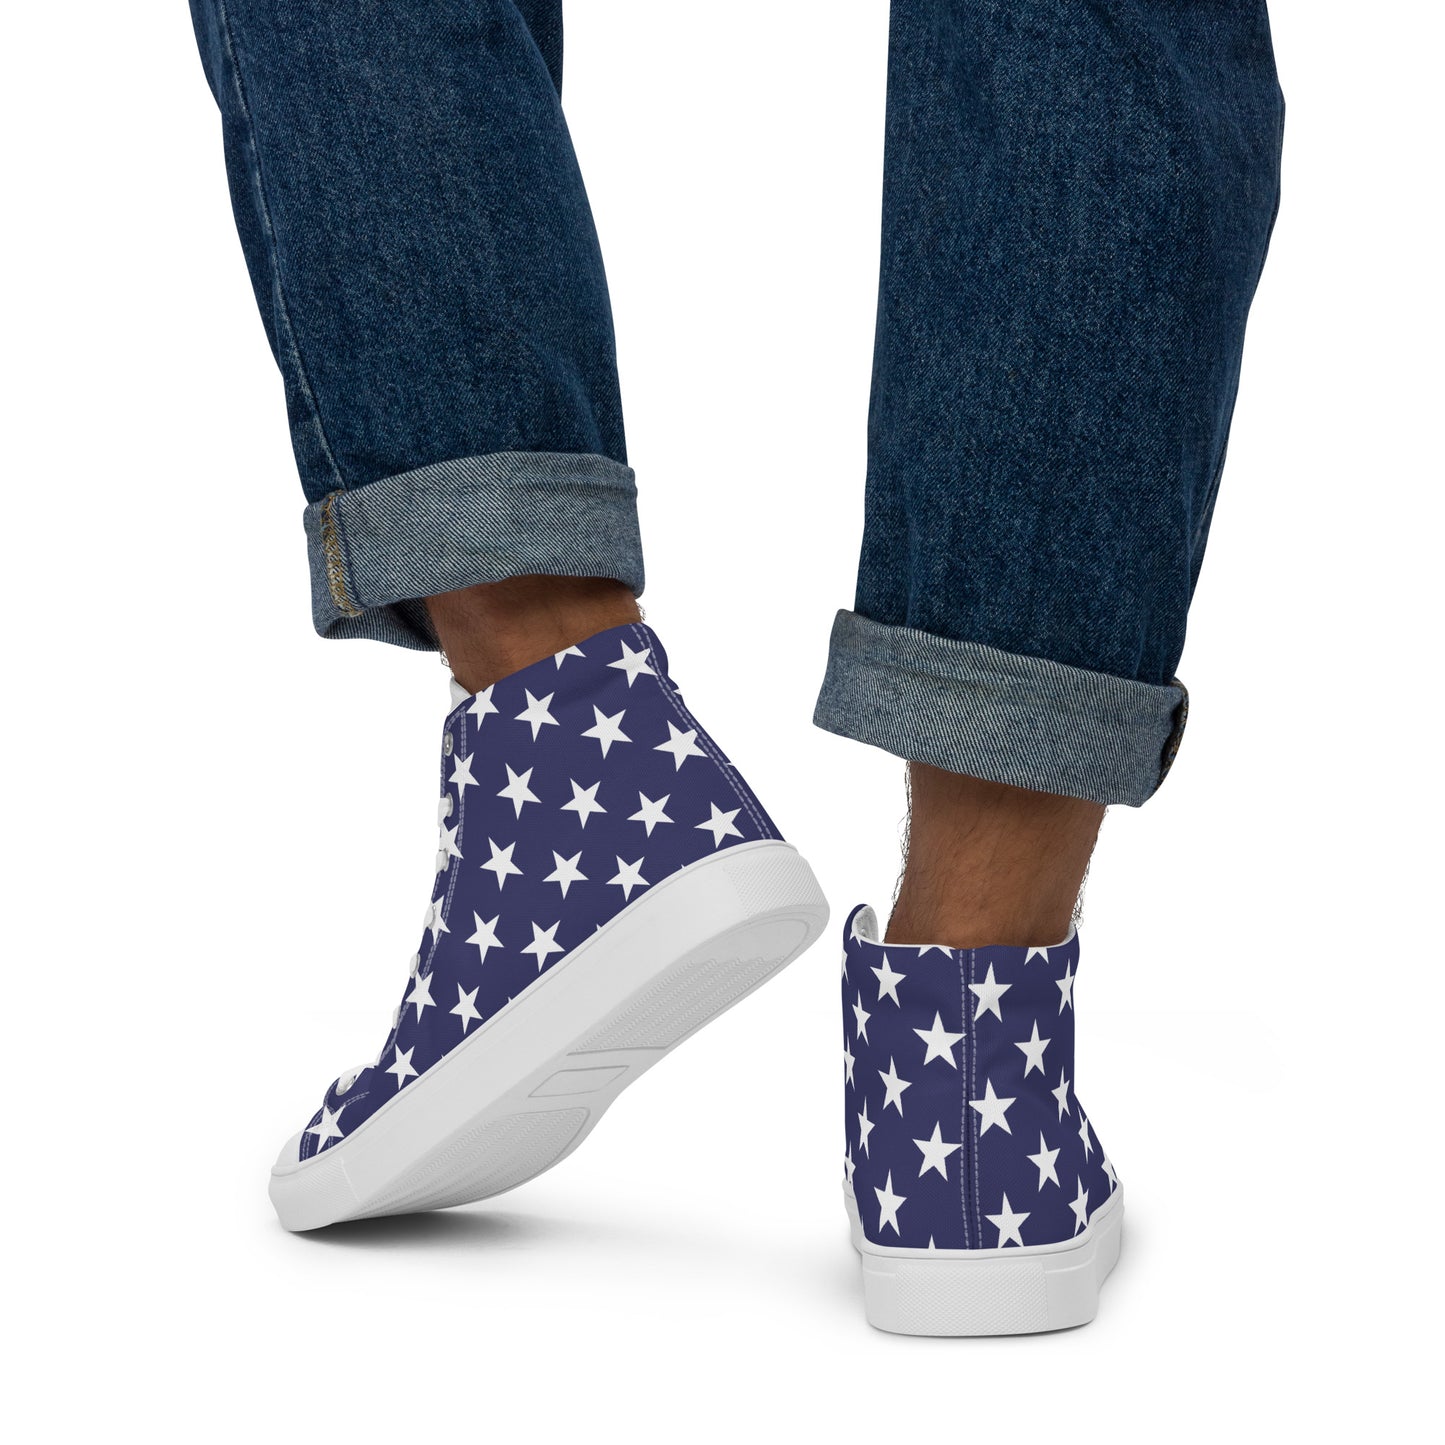 Patriotic Cool High Top Sneakers For Men With American Flag Print